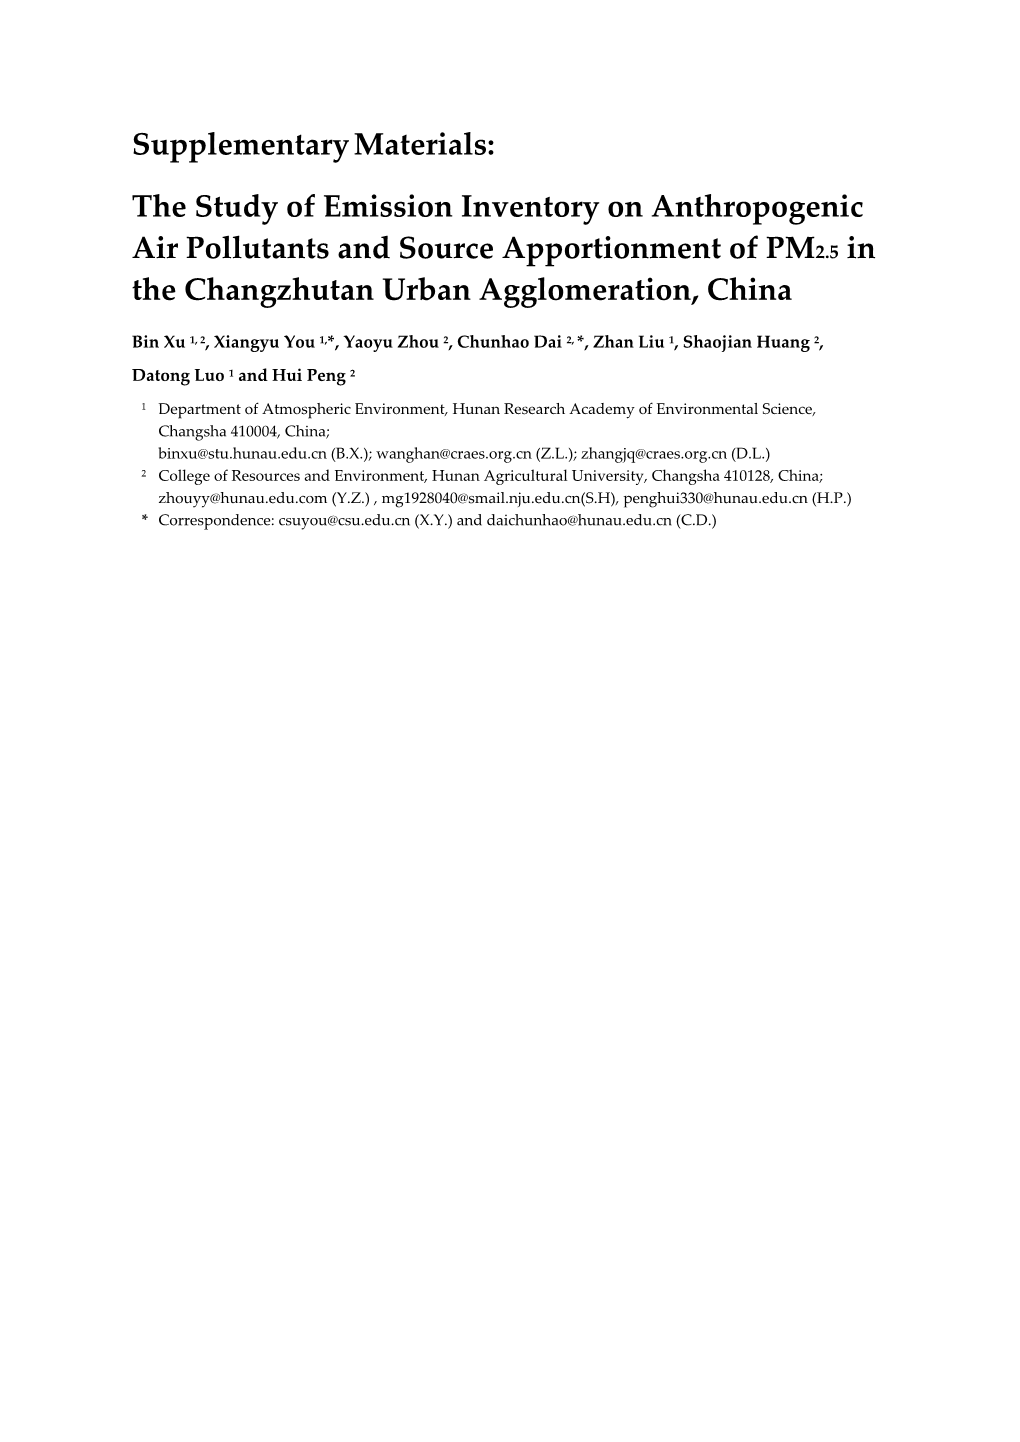 The Study of Emission Inventory on Anthropogenic Air Pollutants and Source Apportionment of PM2.5 in the Changzhutan Urban Agglomeration, China